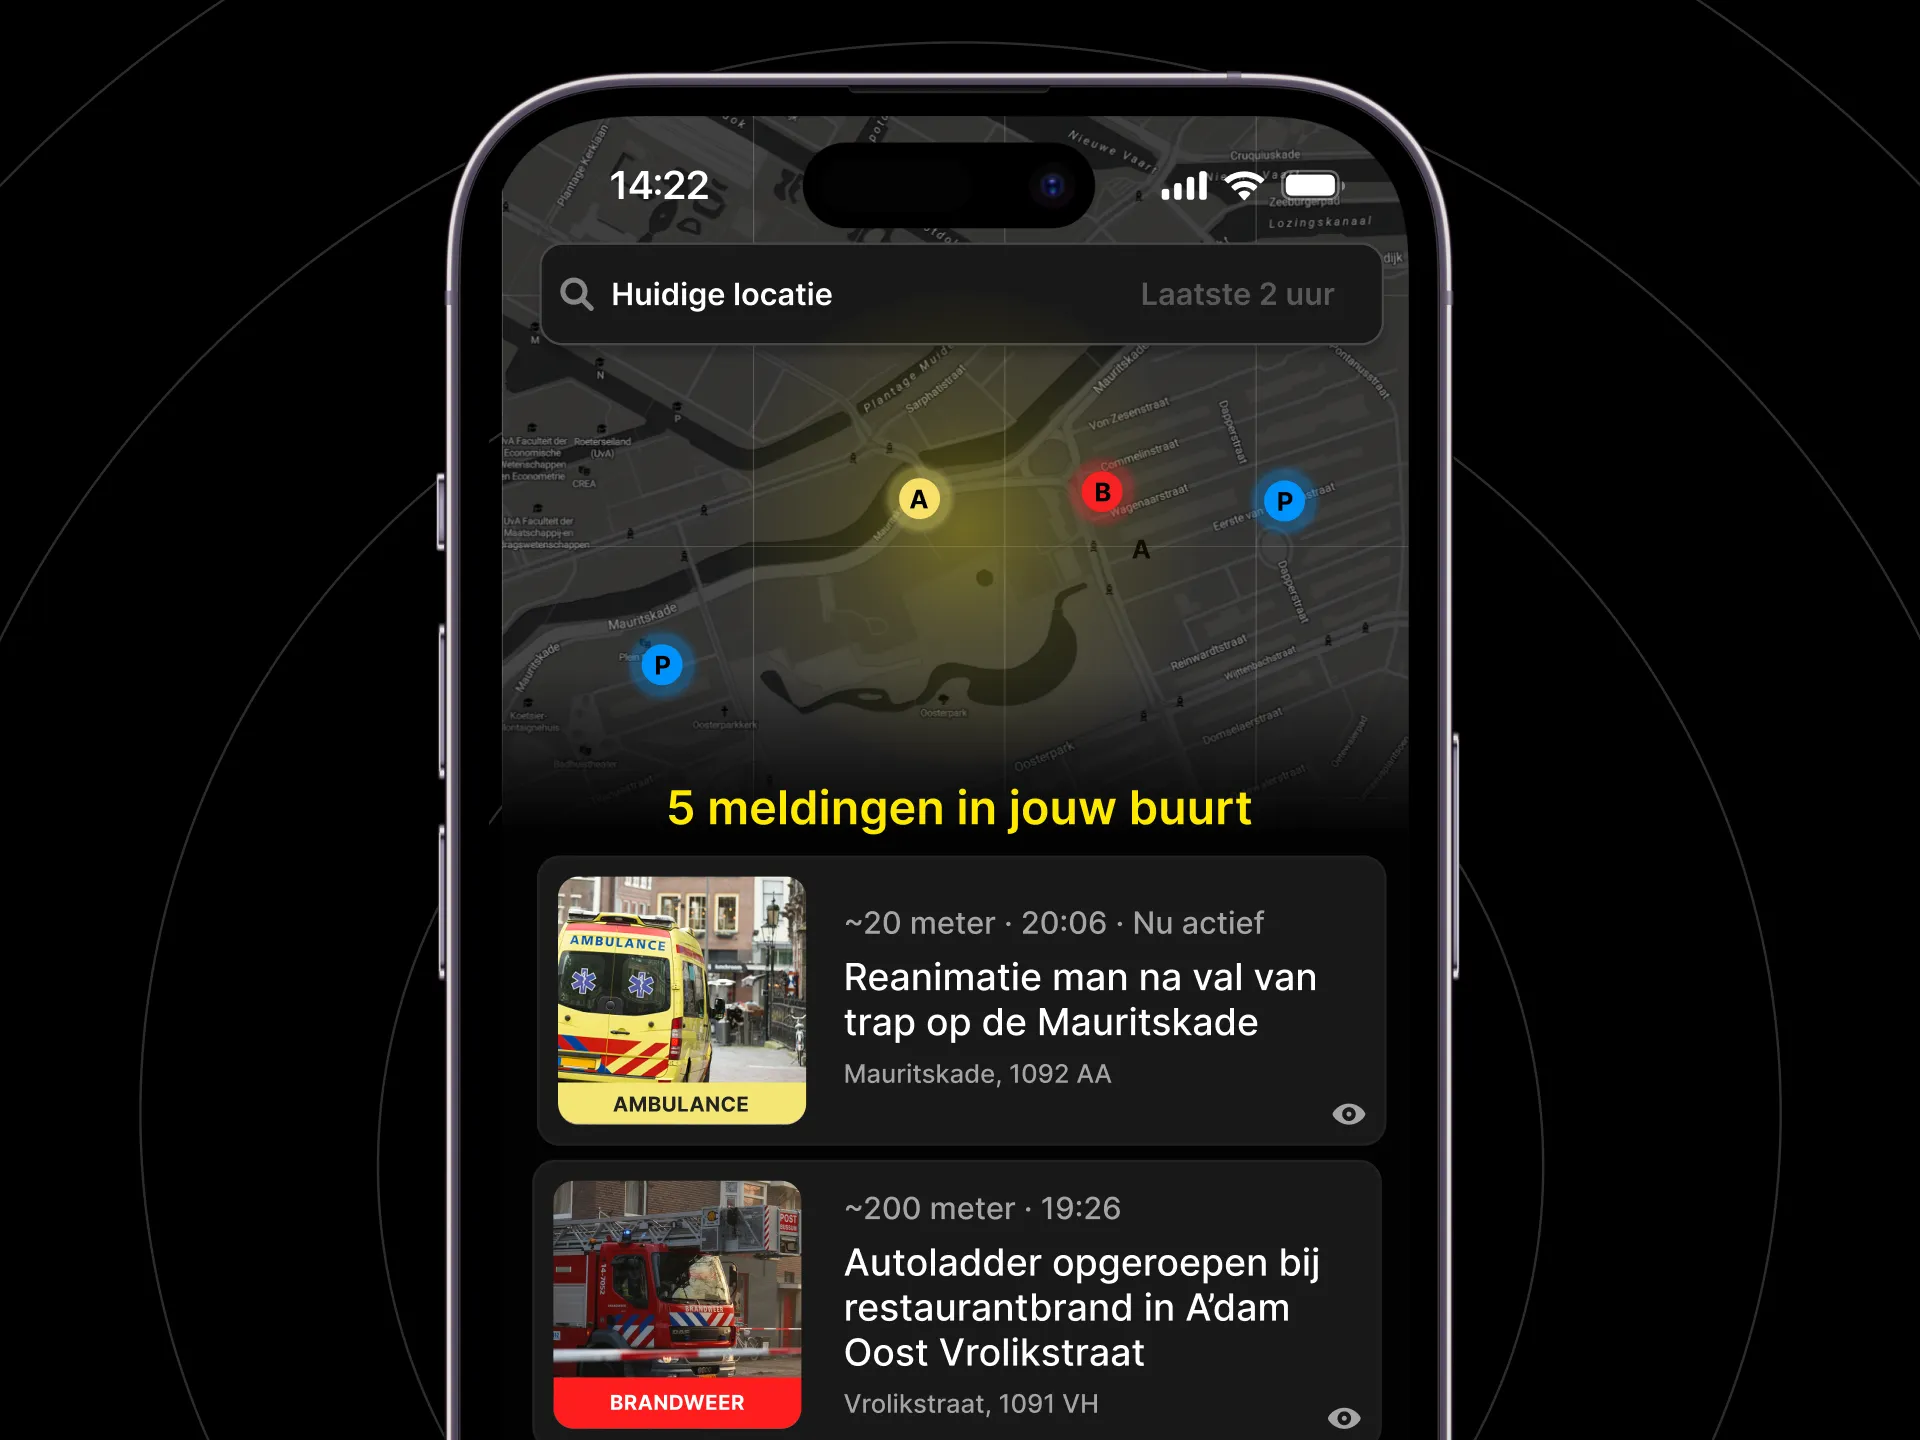 Black phone on black background showing concept emergency monitoring app with map showing active emergencies in Amsterdam